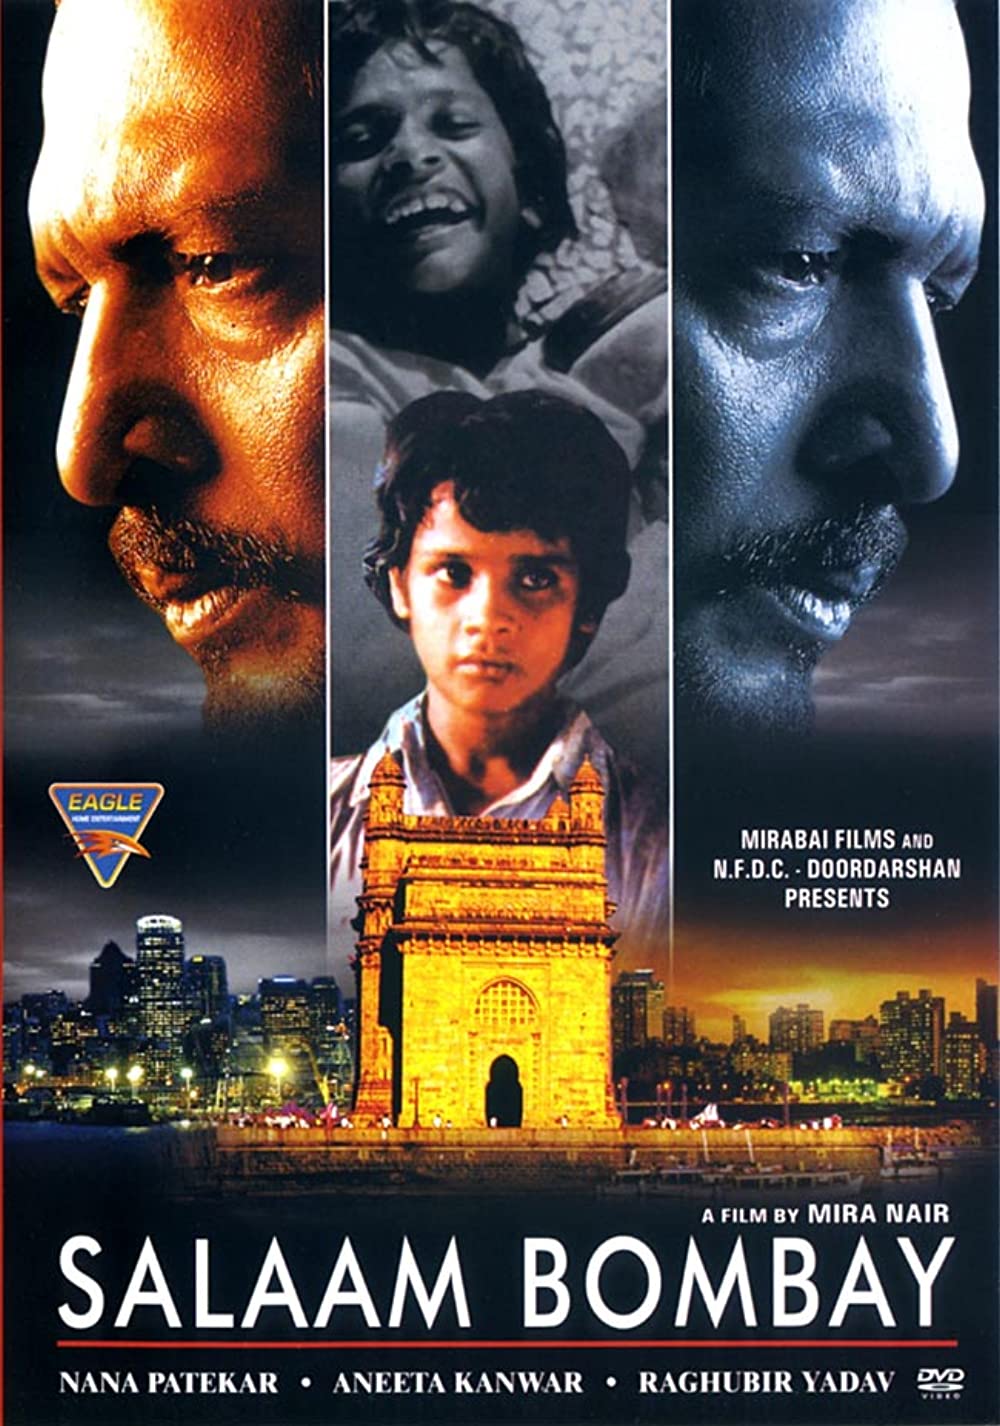 Salaam Bombay! (1988) is one of the underrated Bollywood movies